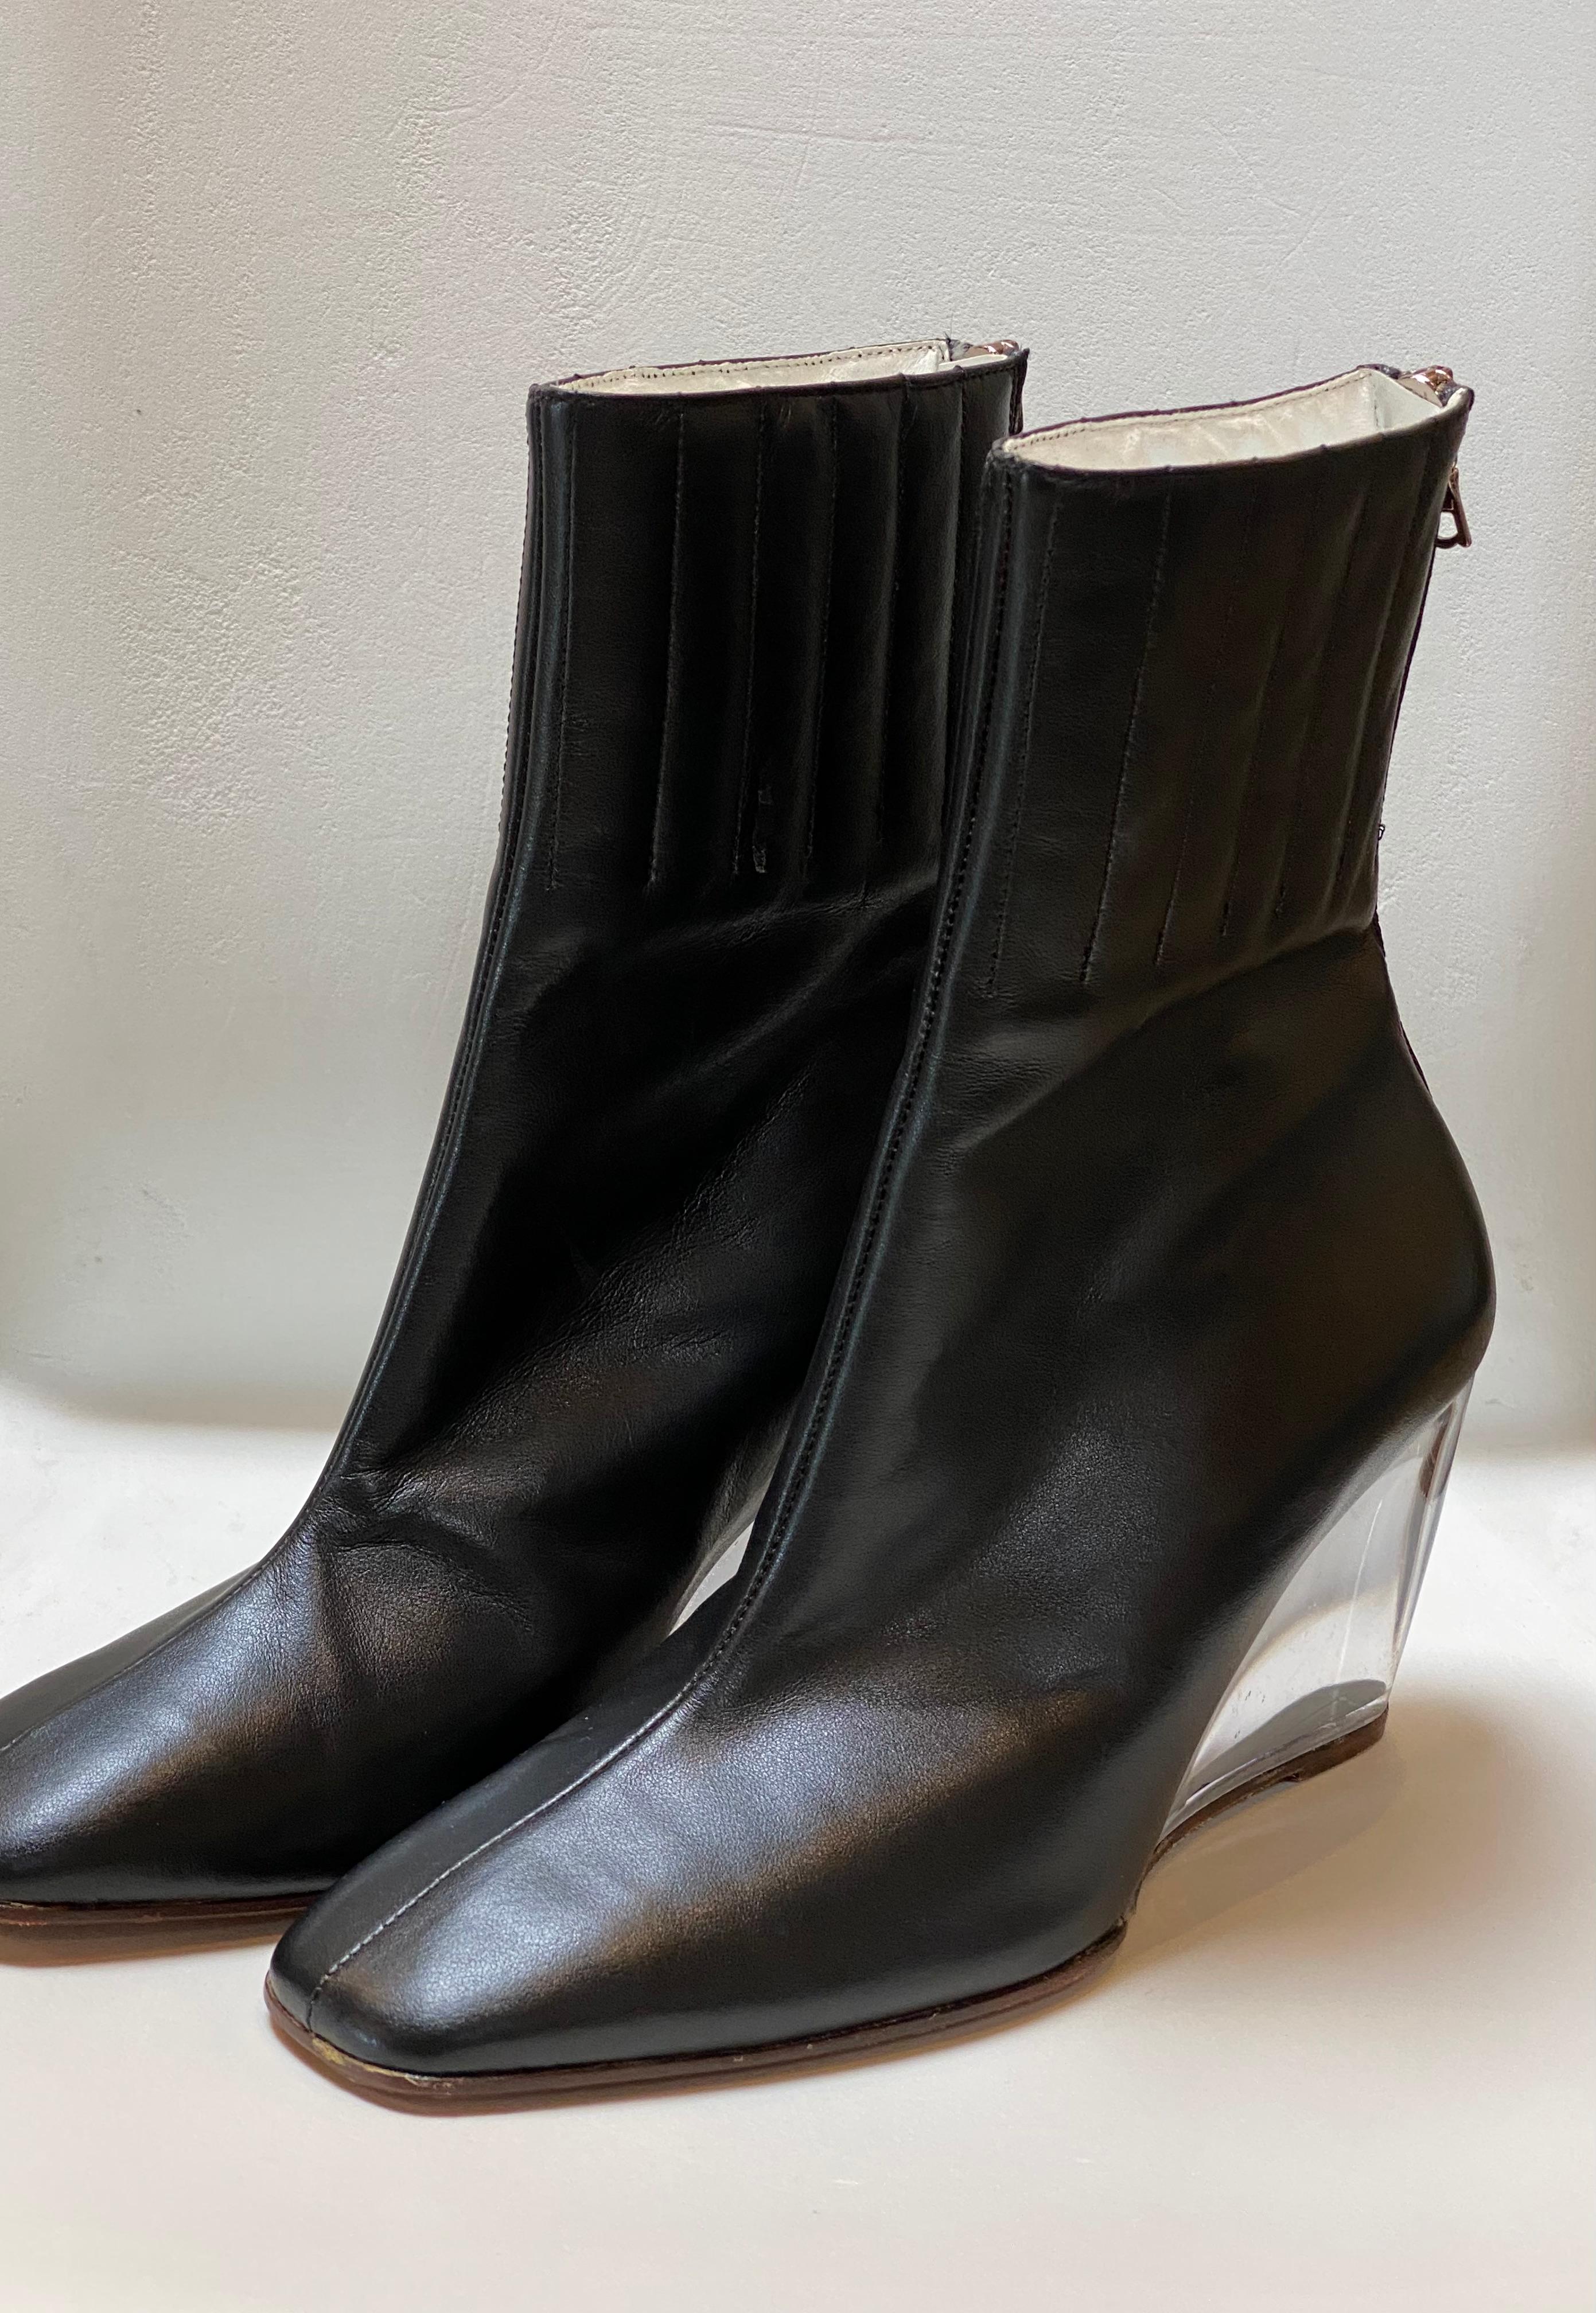 Courreges Black Leather Ankle Boot with Plexi Wedge Heel In New Condition For Sale In Laguna Beach, CA